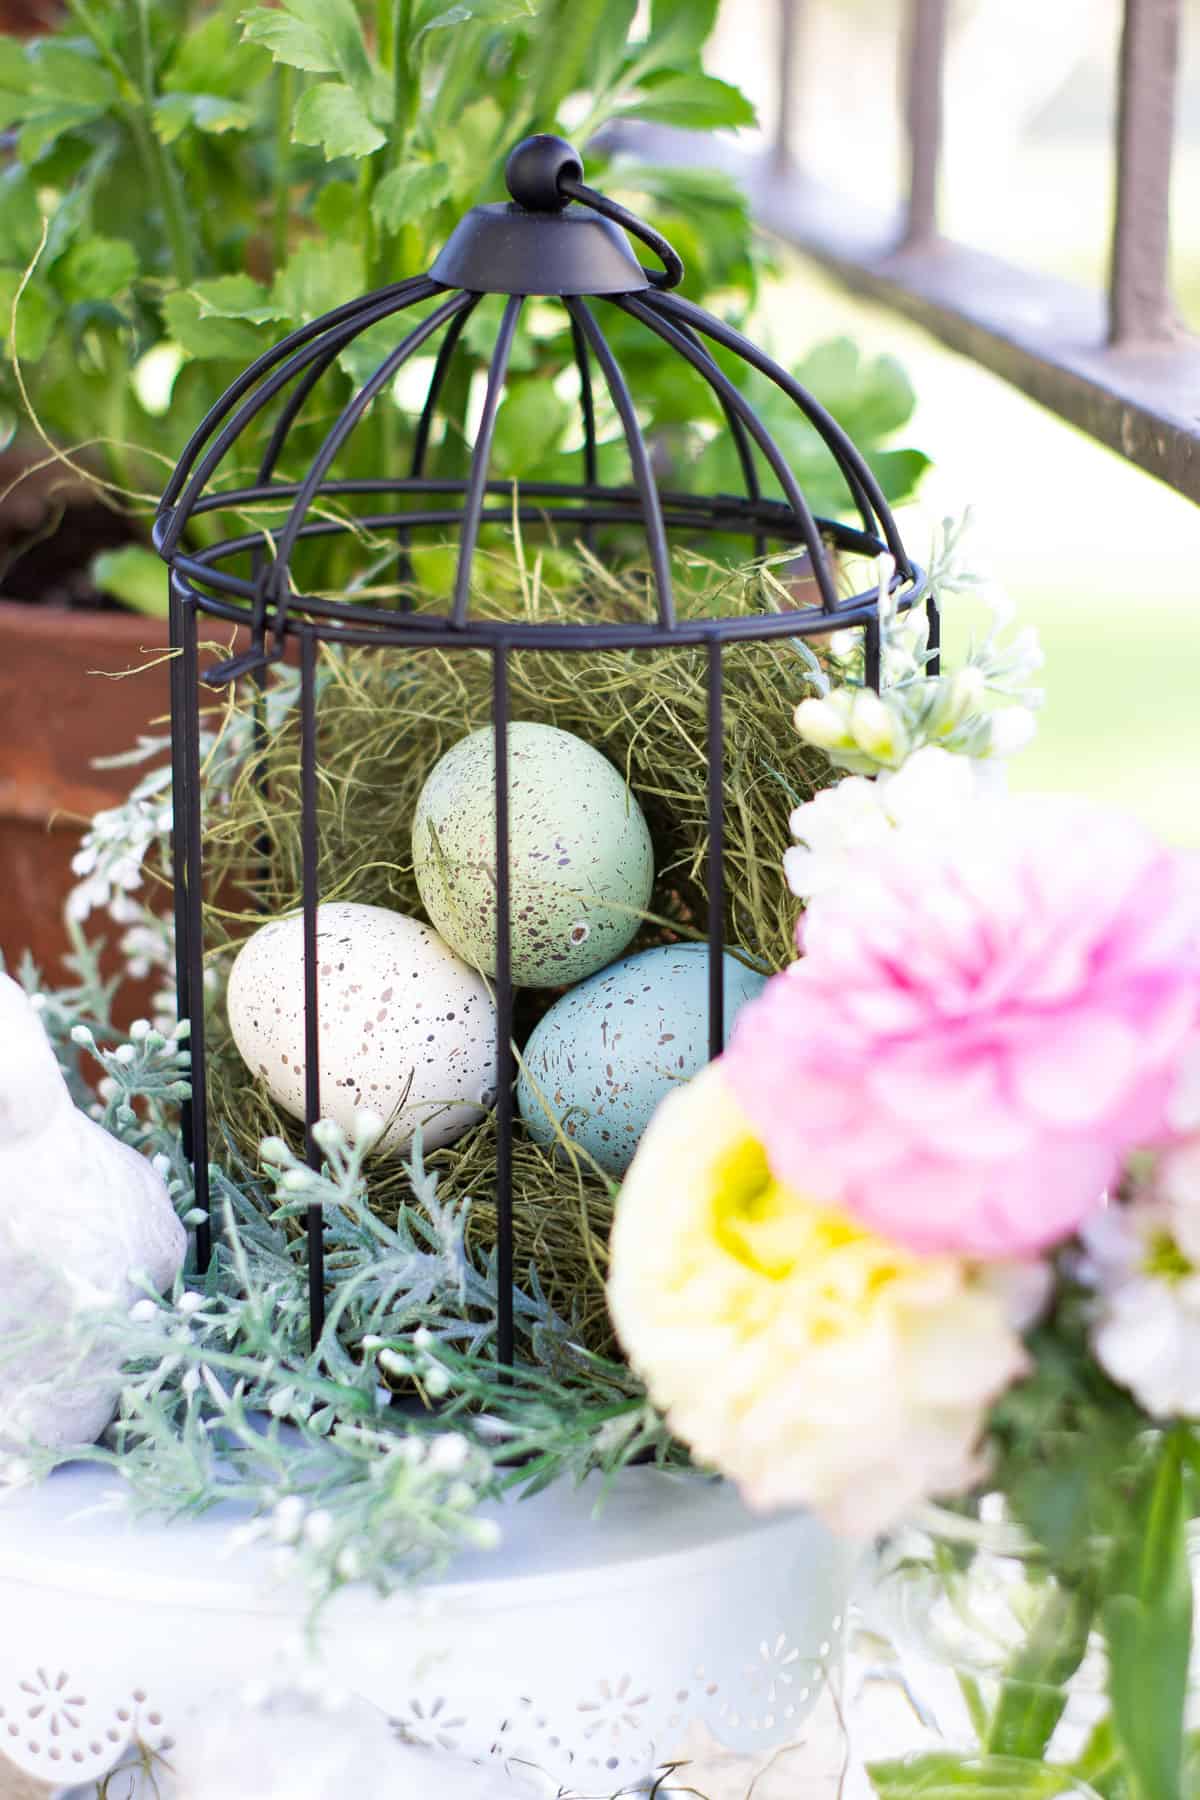 spring bird cage pinterest challenge vignette with bird cage and spring elements